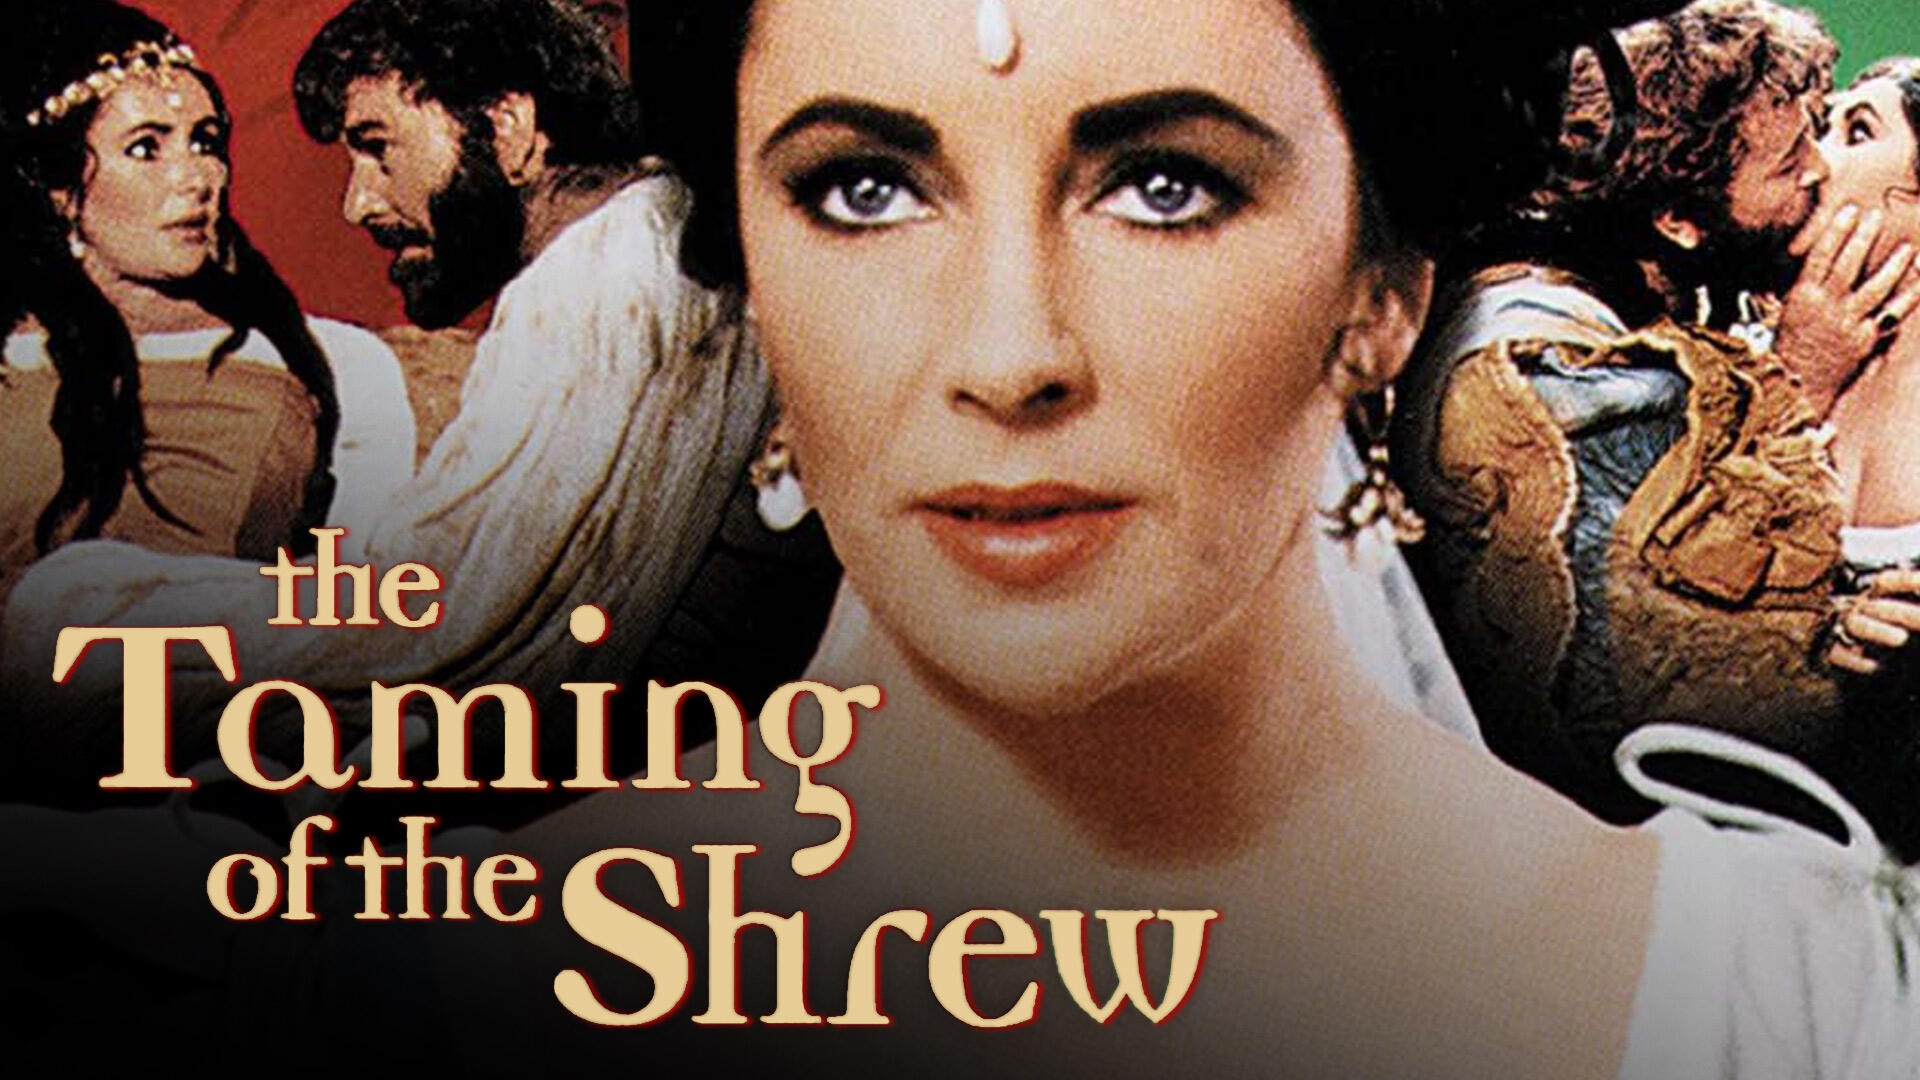 42-facts-about-the-movie-the-taming-of-the-shrew